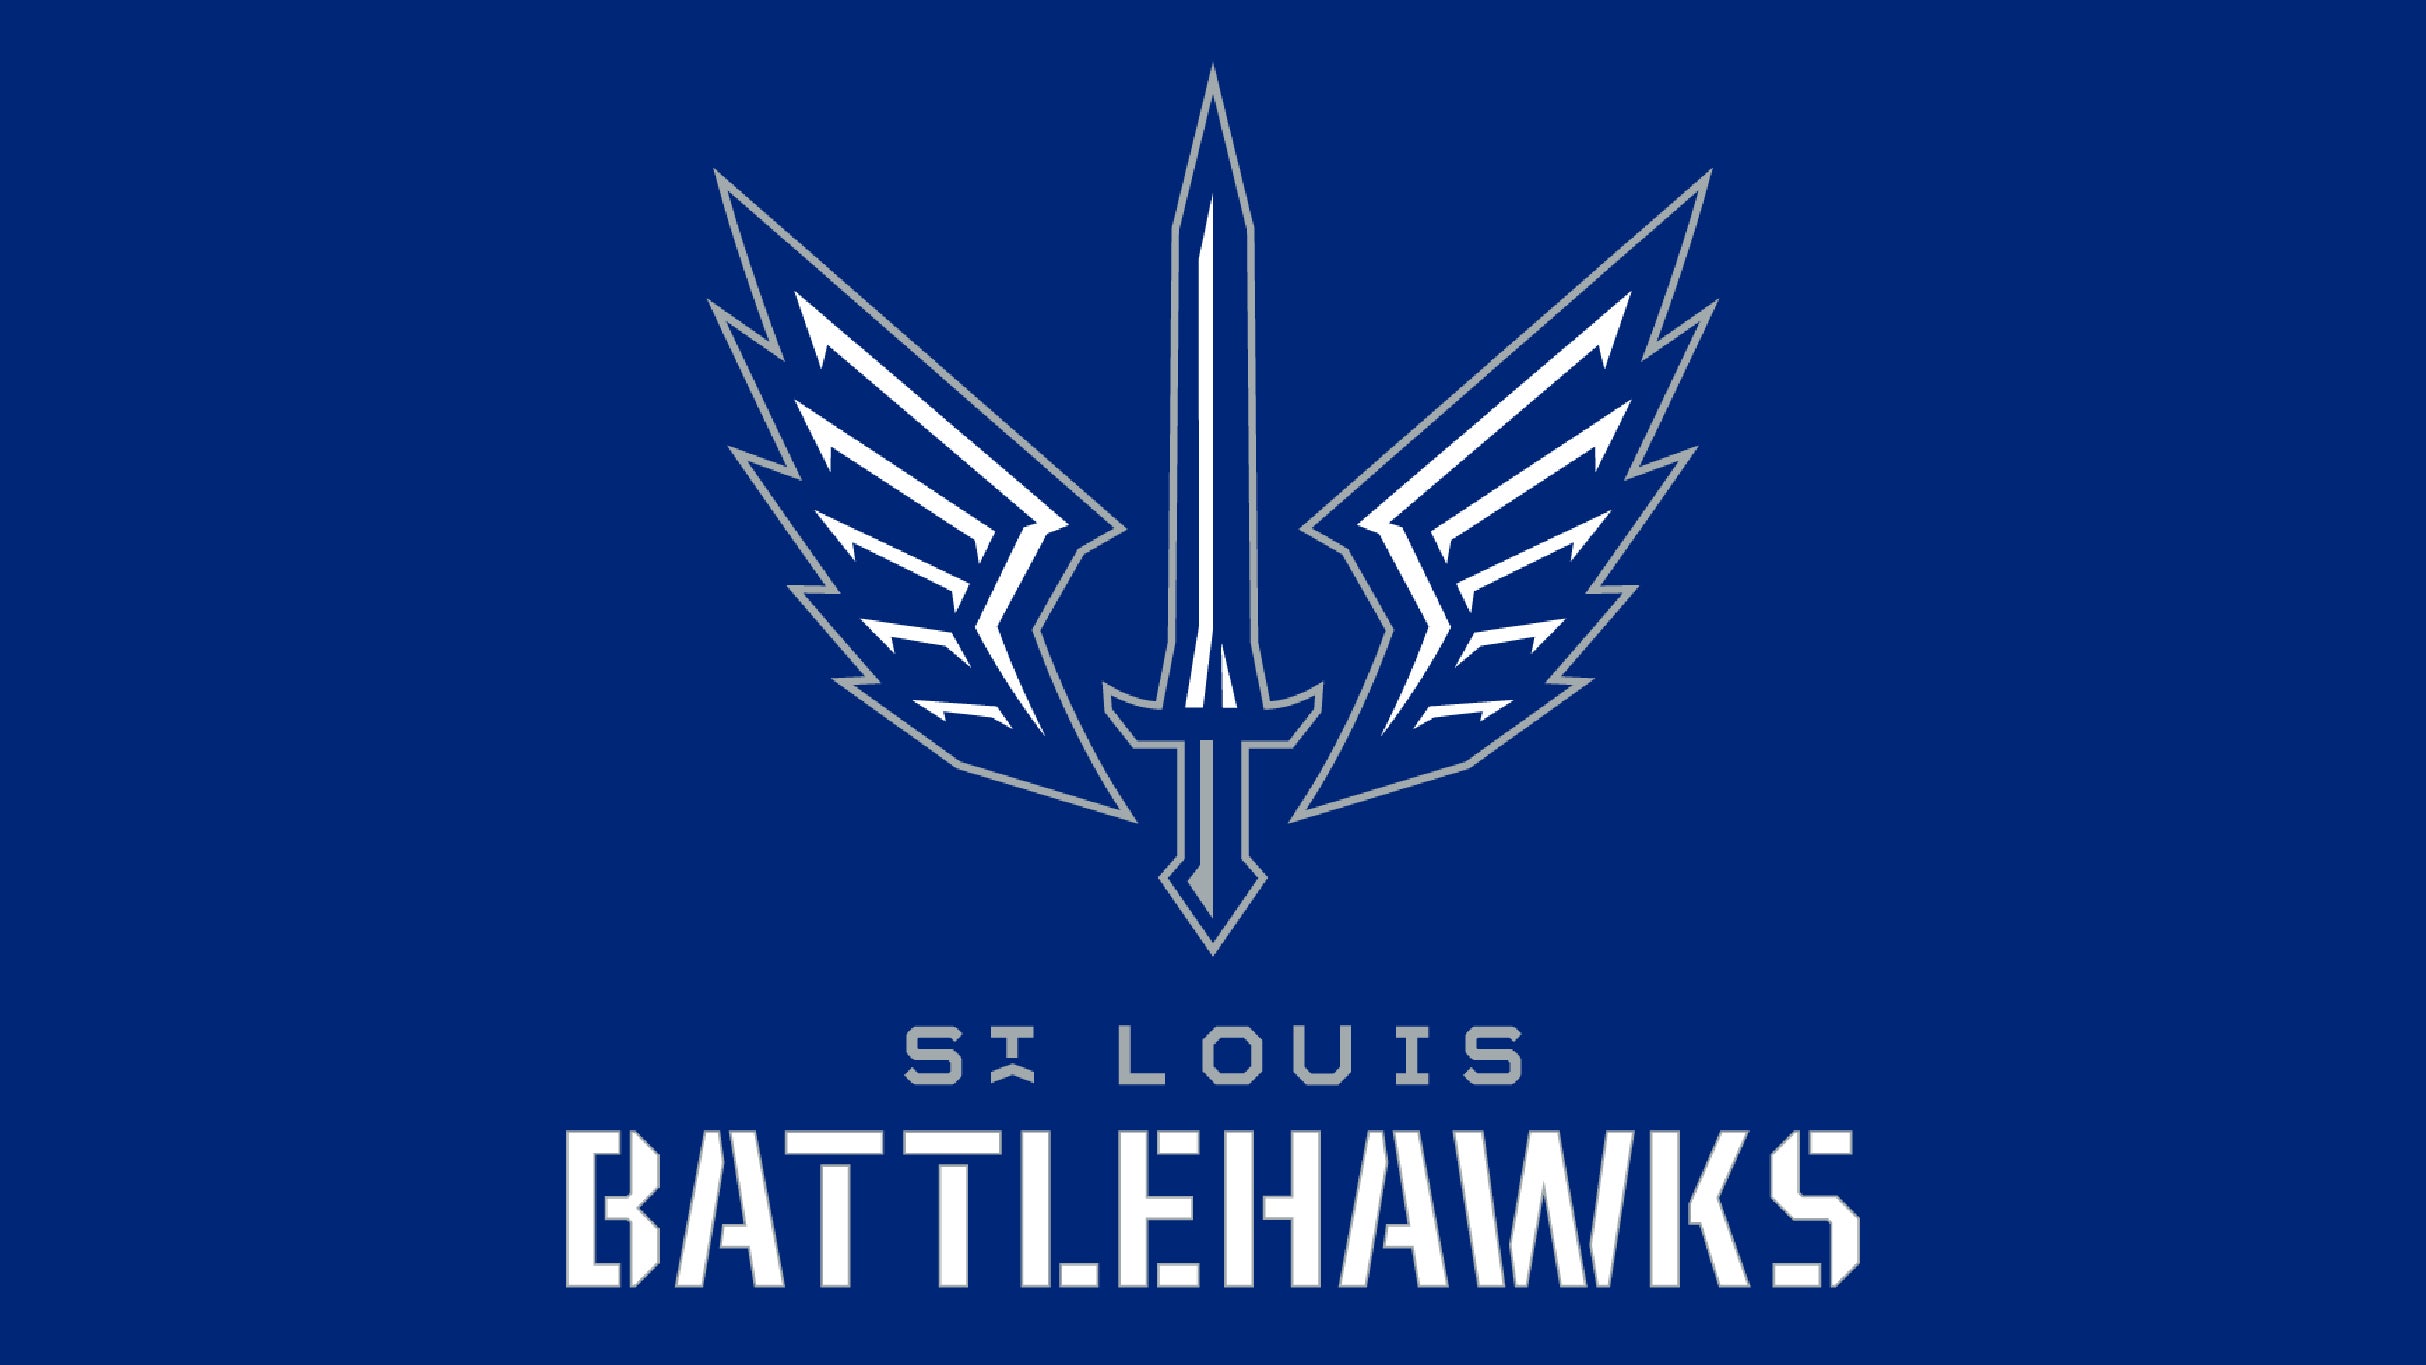 St. Louis Battlehawks vs. Arlington Renegades pre-sale password for performance tickets in St Louis, MO (The Dome at America's Center)